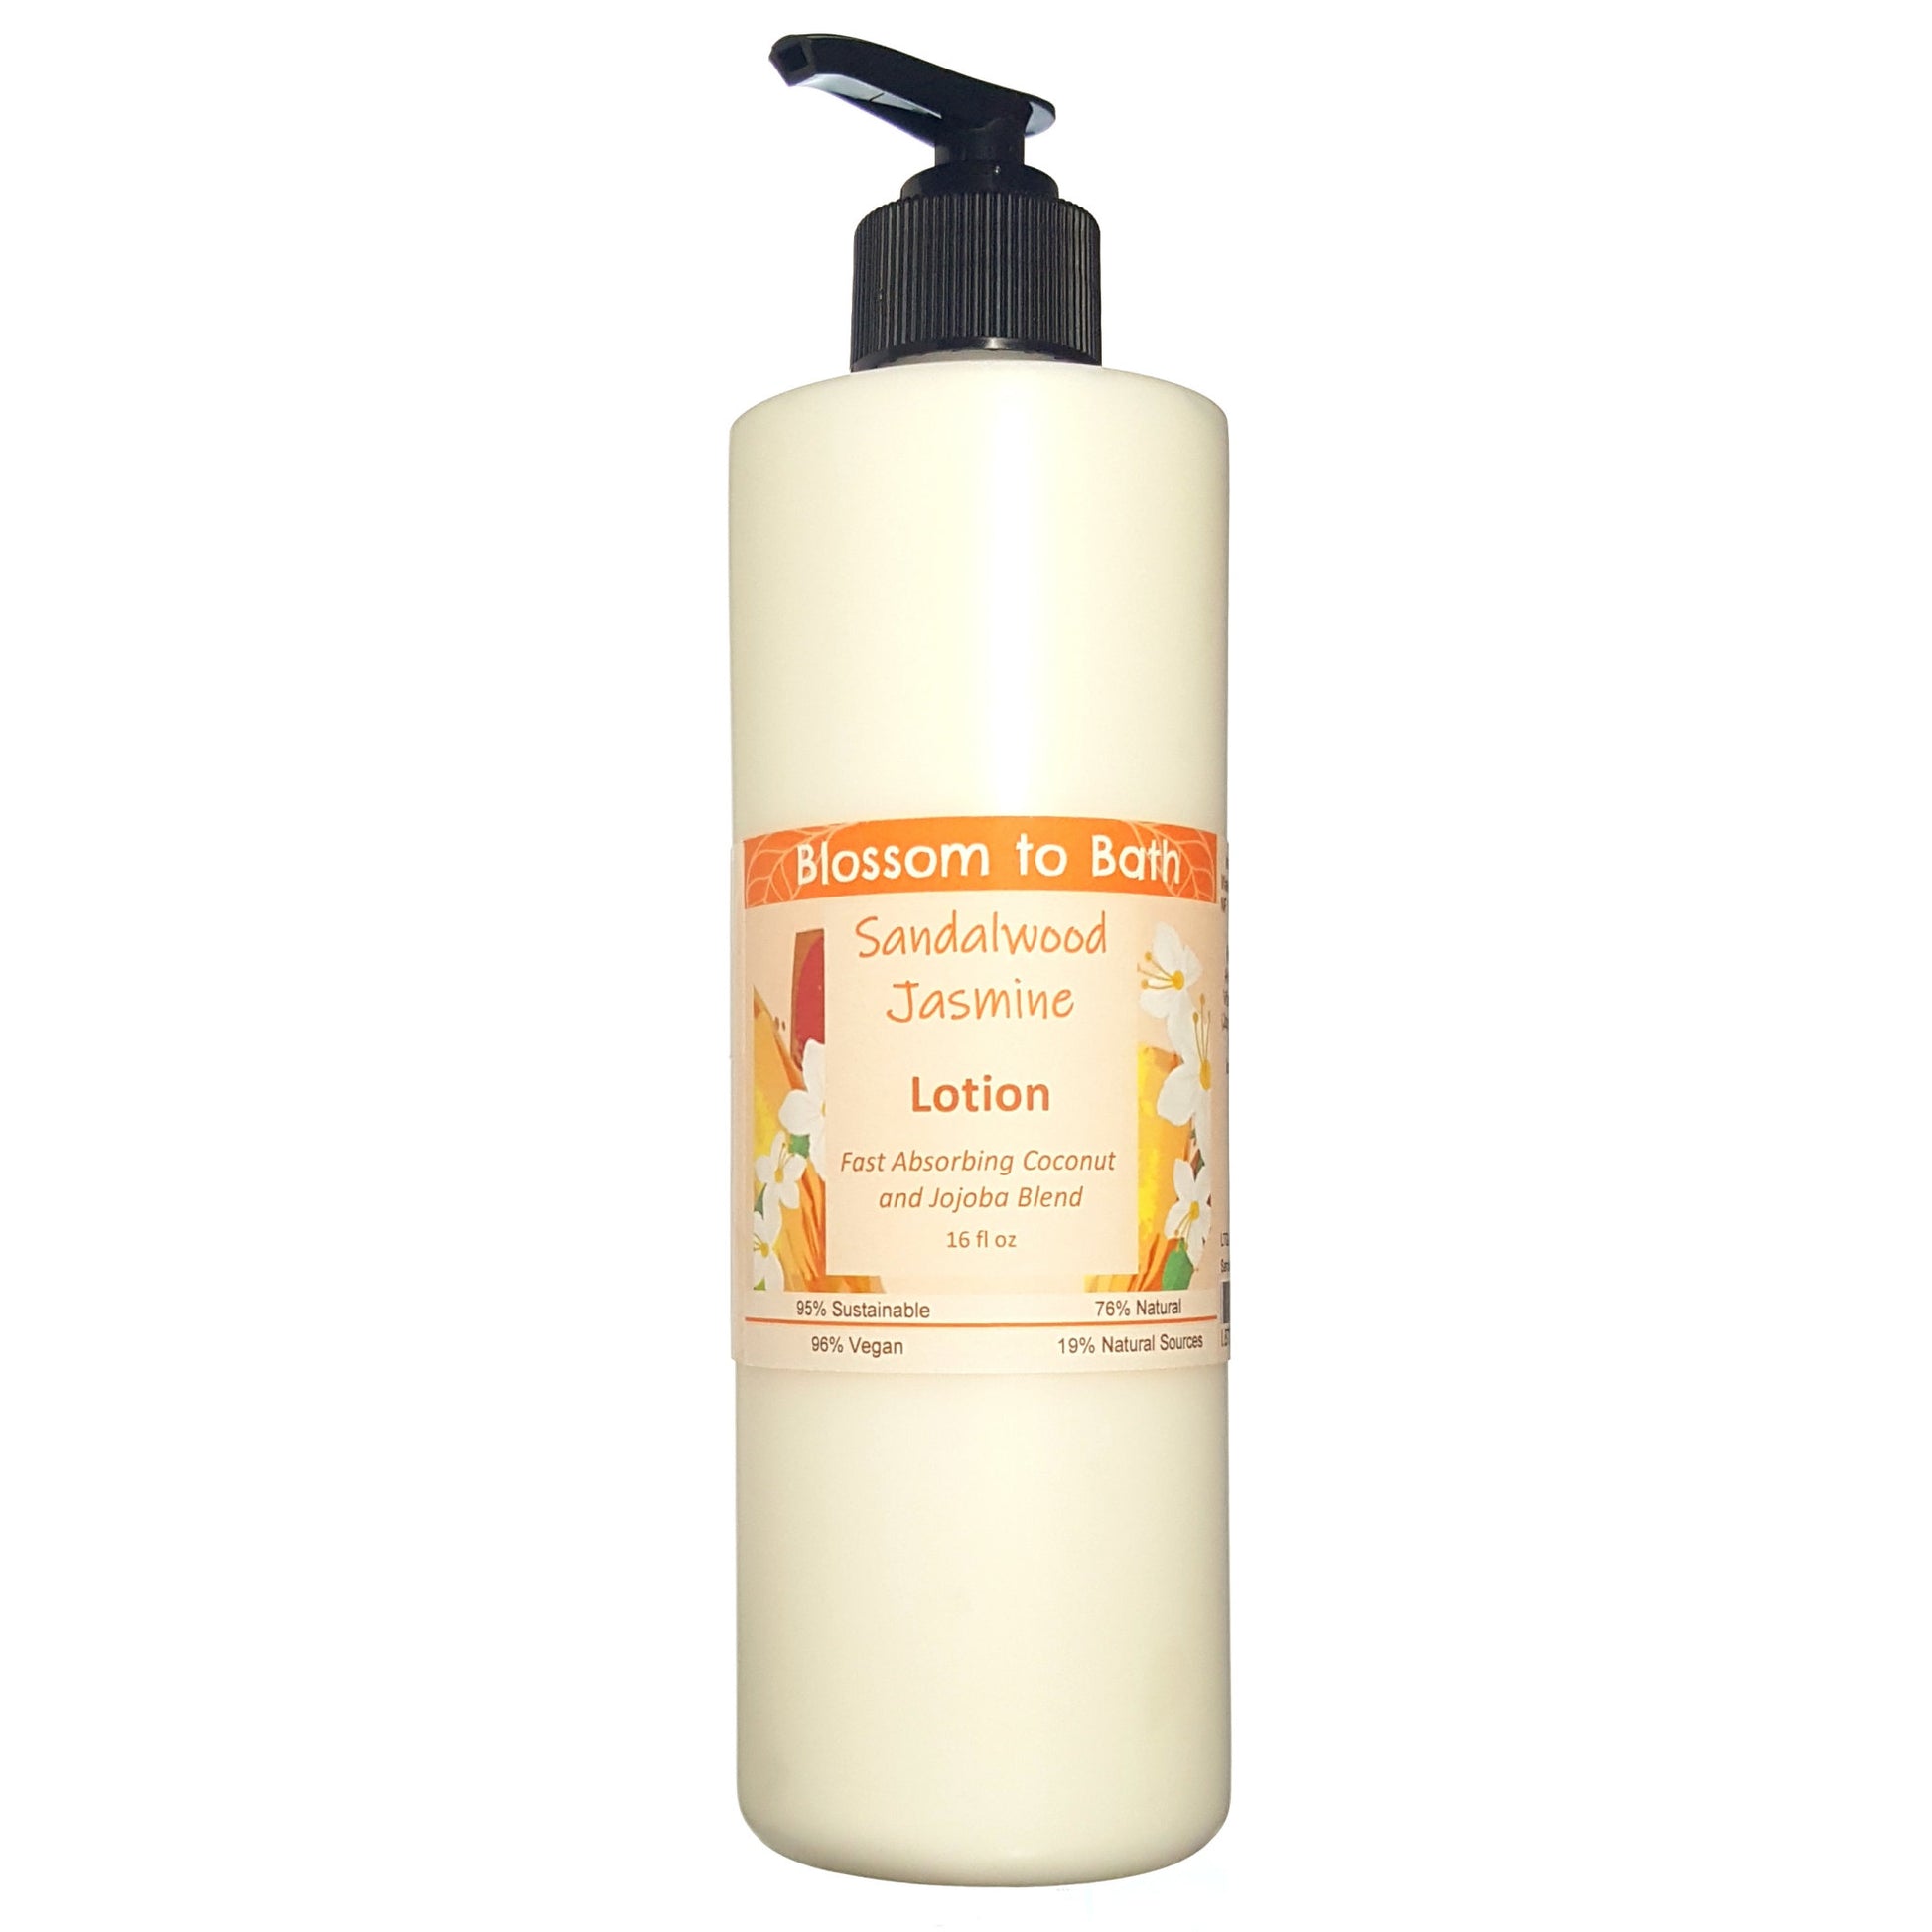 Buy Blossom to Bath Sandalwood Jasmine Lotion from Flowersong Soap Studio.  Daily moisture luxury that soaks in quickly made with organic oils and butters that soften and smooth the skin  Floral jasmine meets earthy sandalwood to create a soul stirring blend.